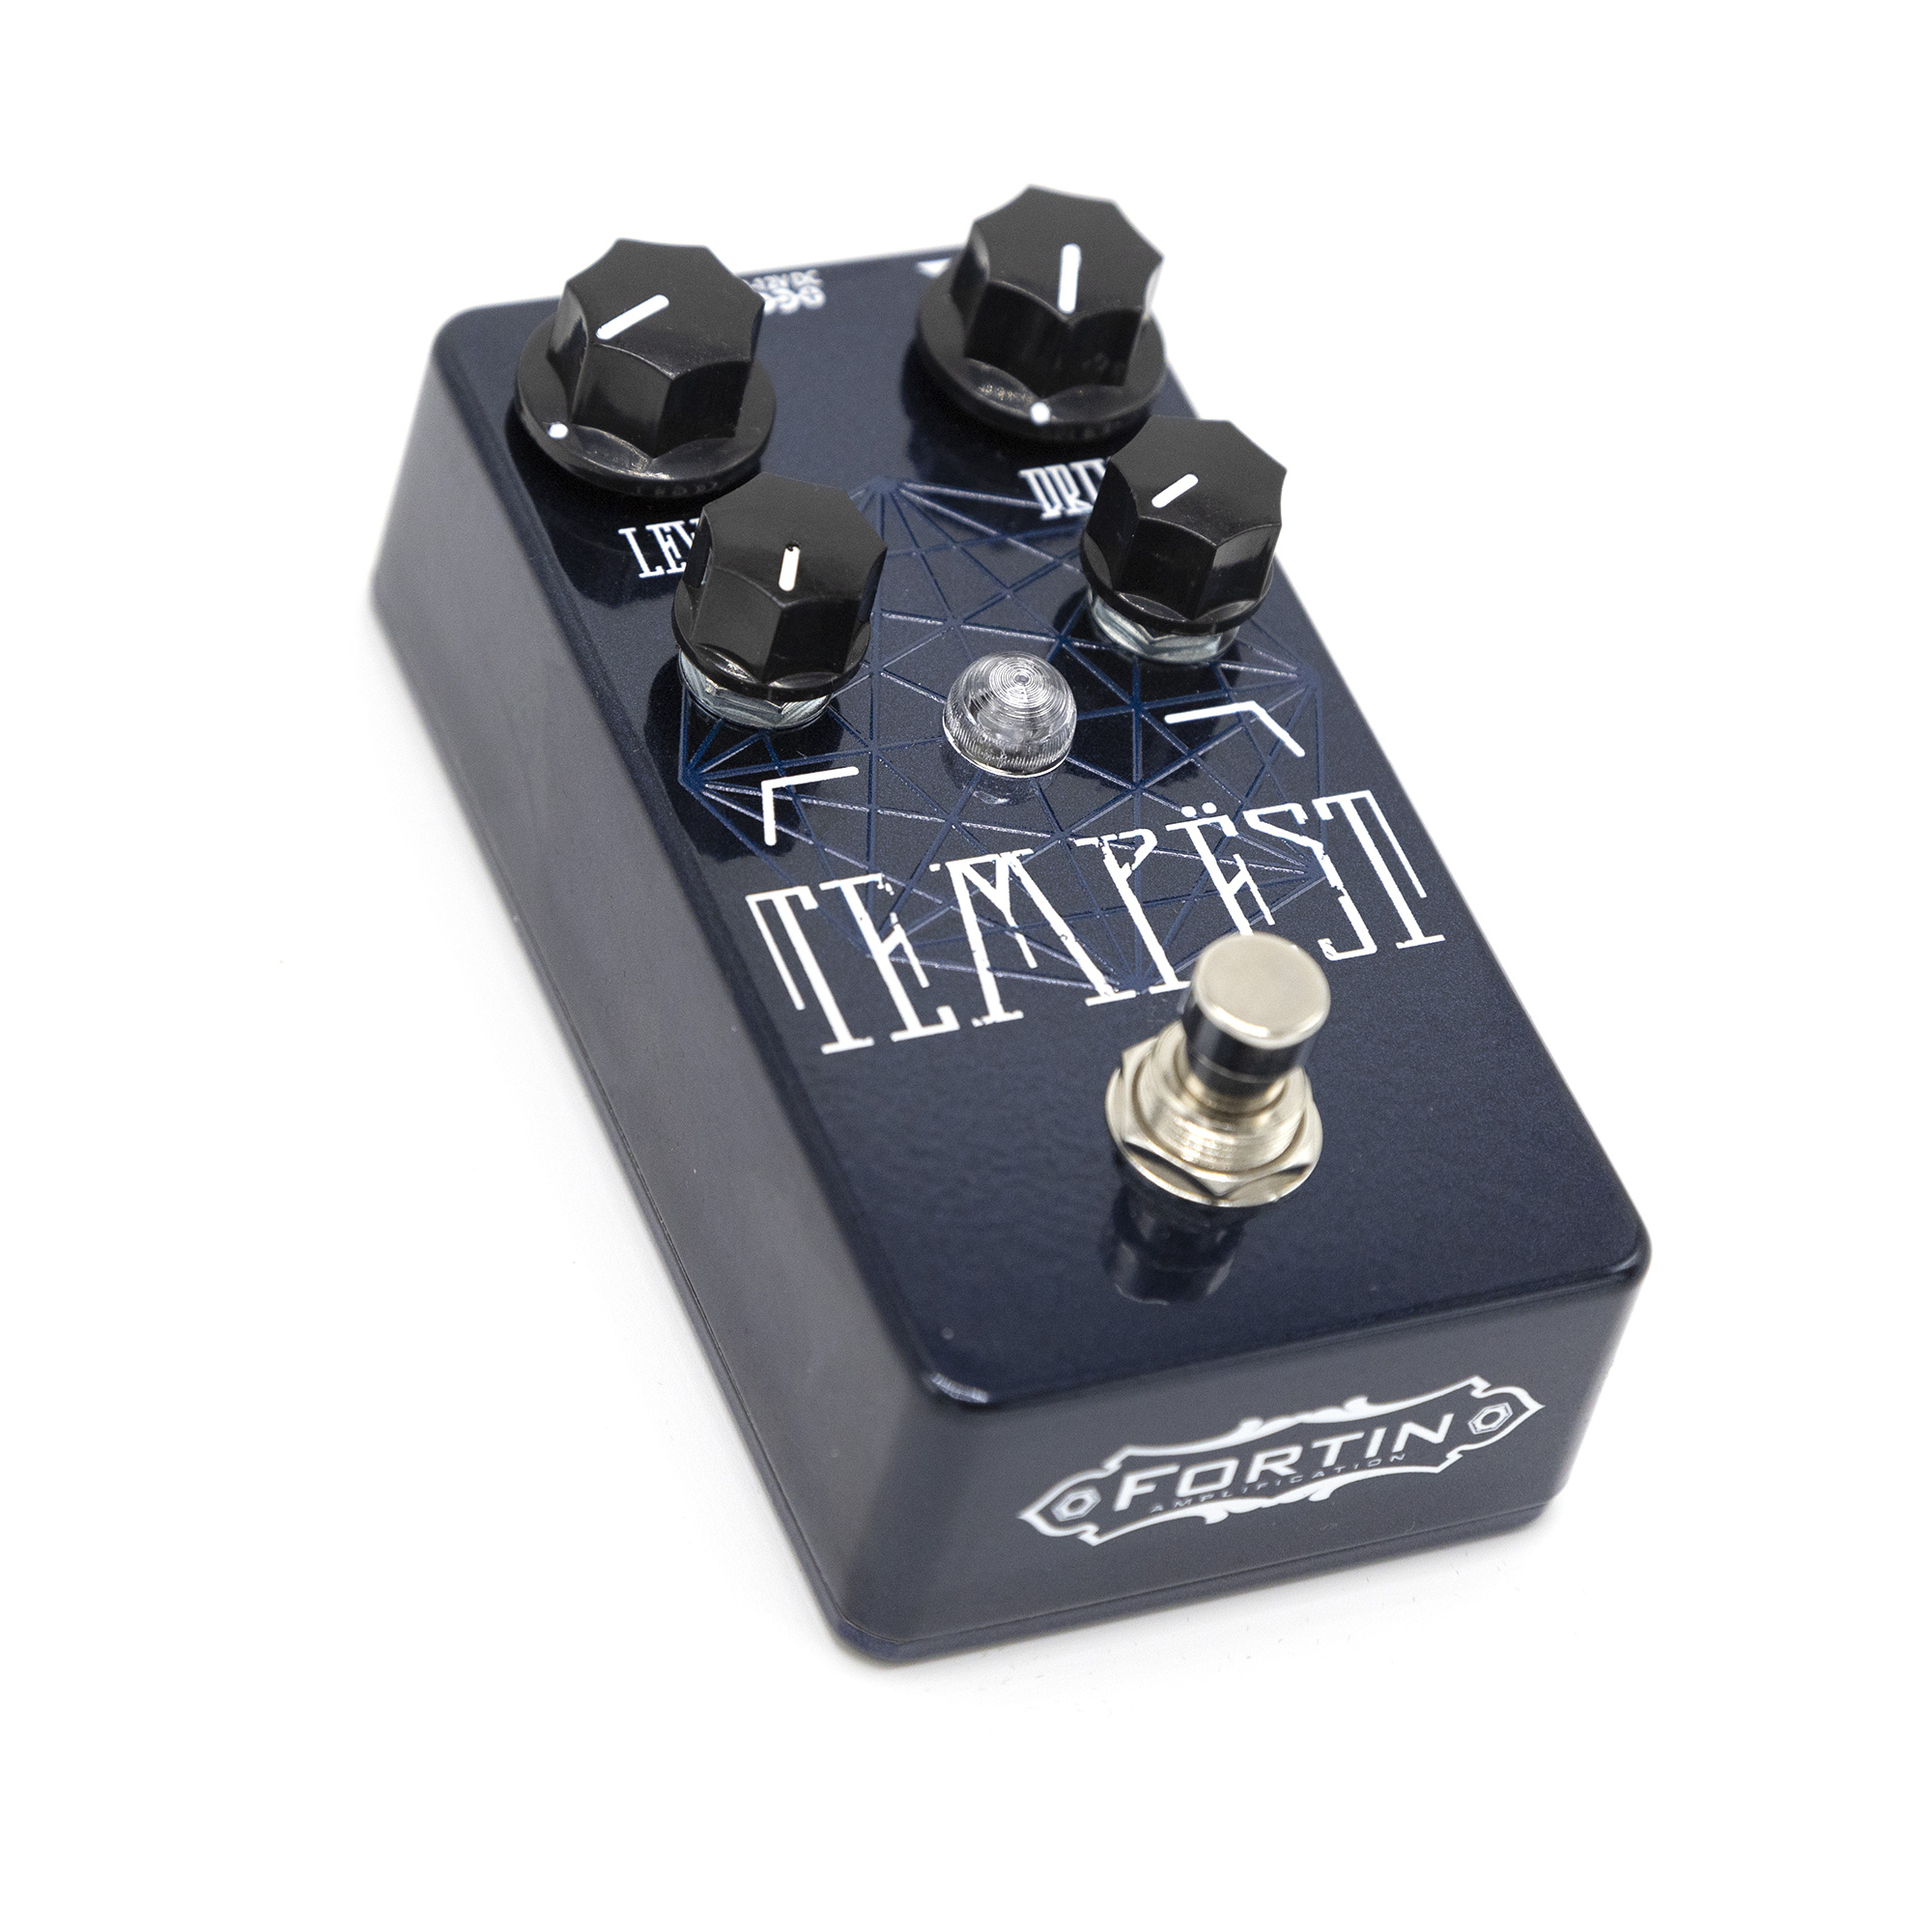 Fortin Amps Tempest Architects Signature Pedal - Overdrive/Distortion/fuzz effectpedaal - Variation 1